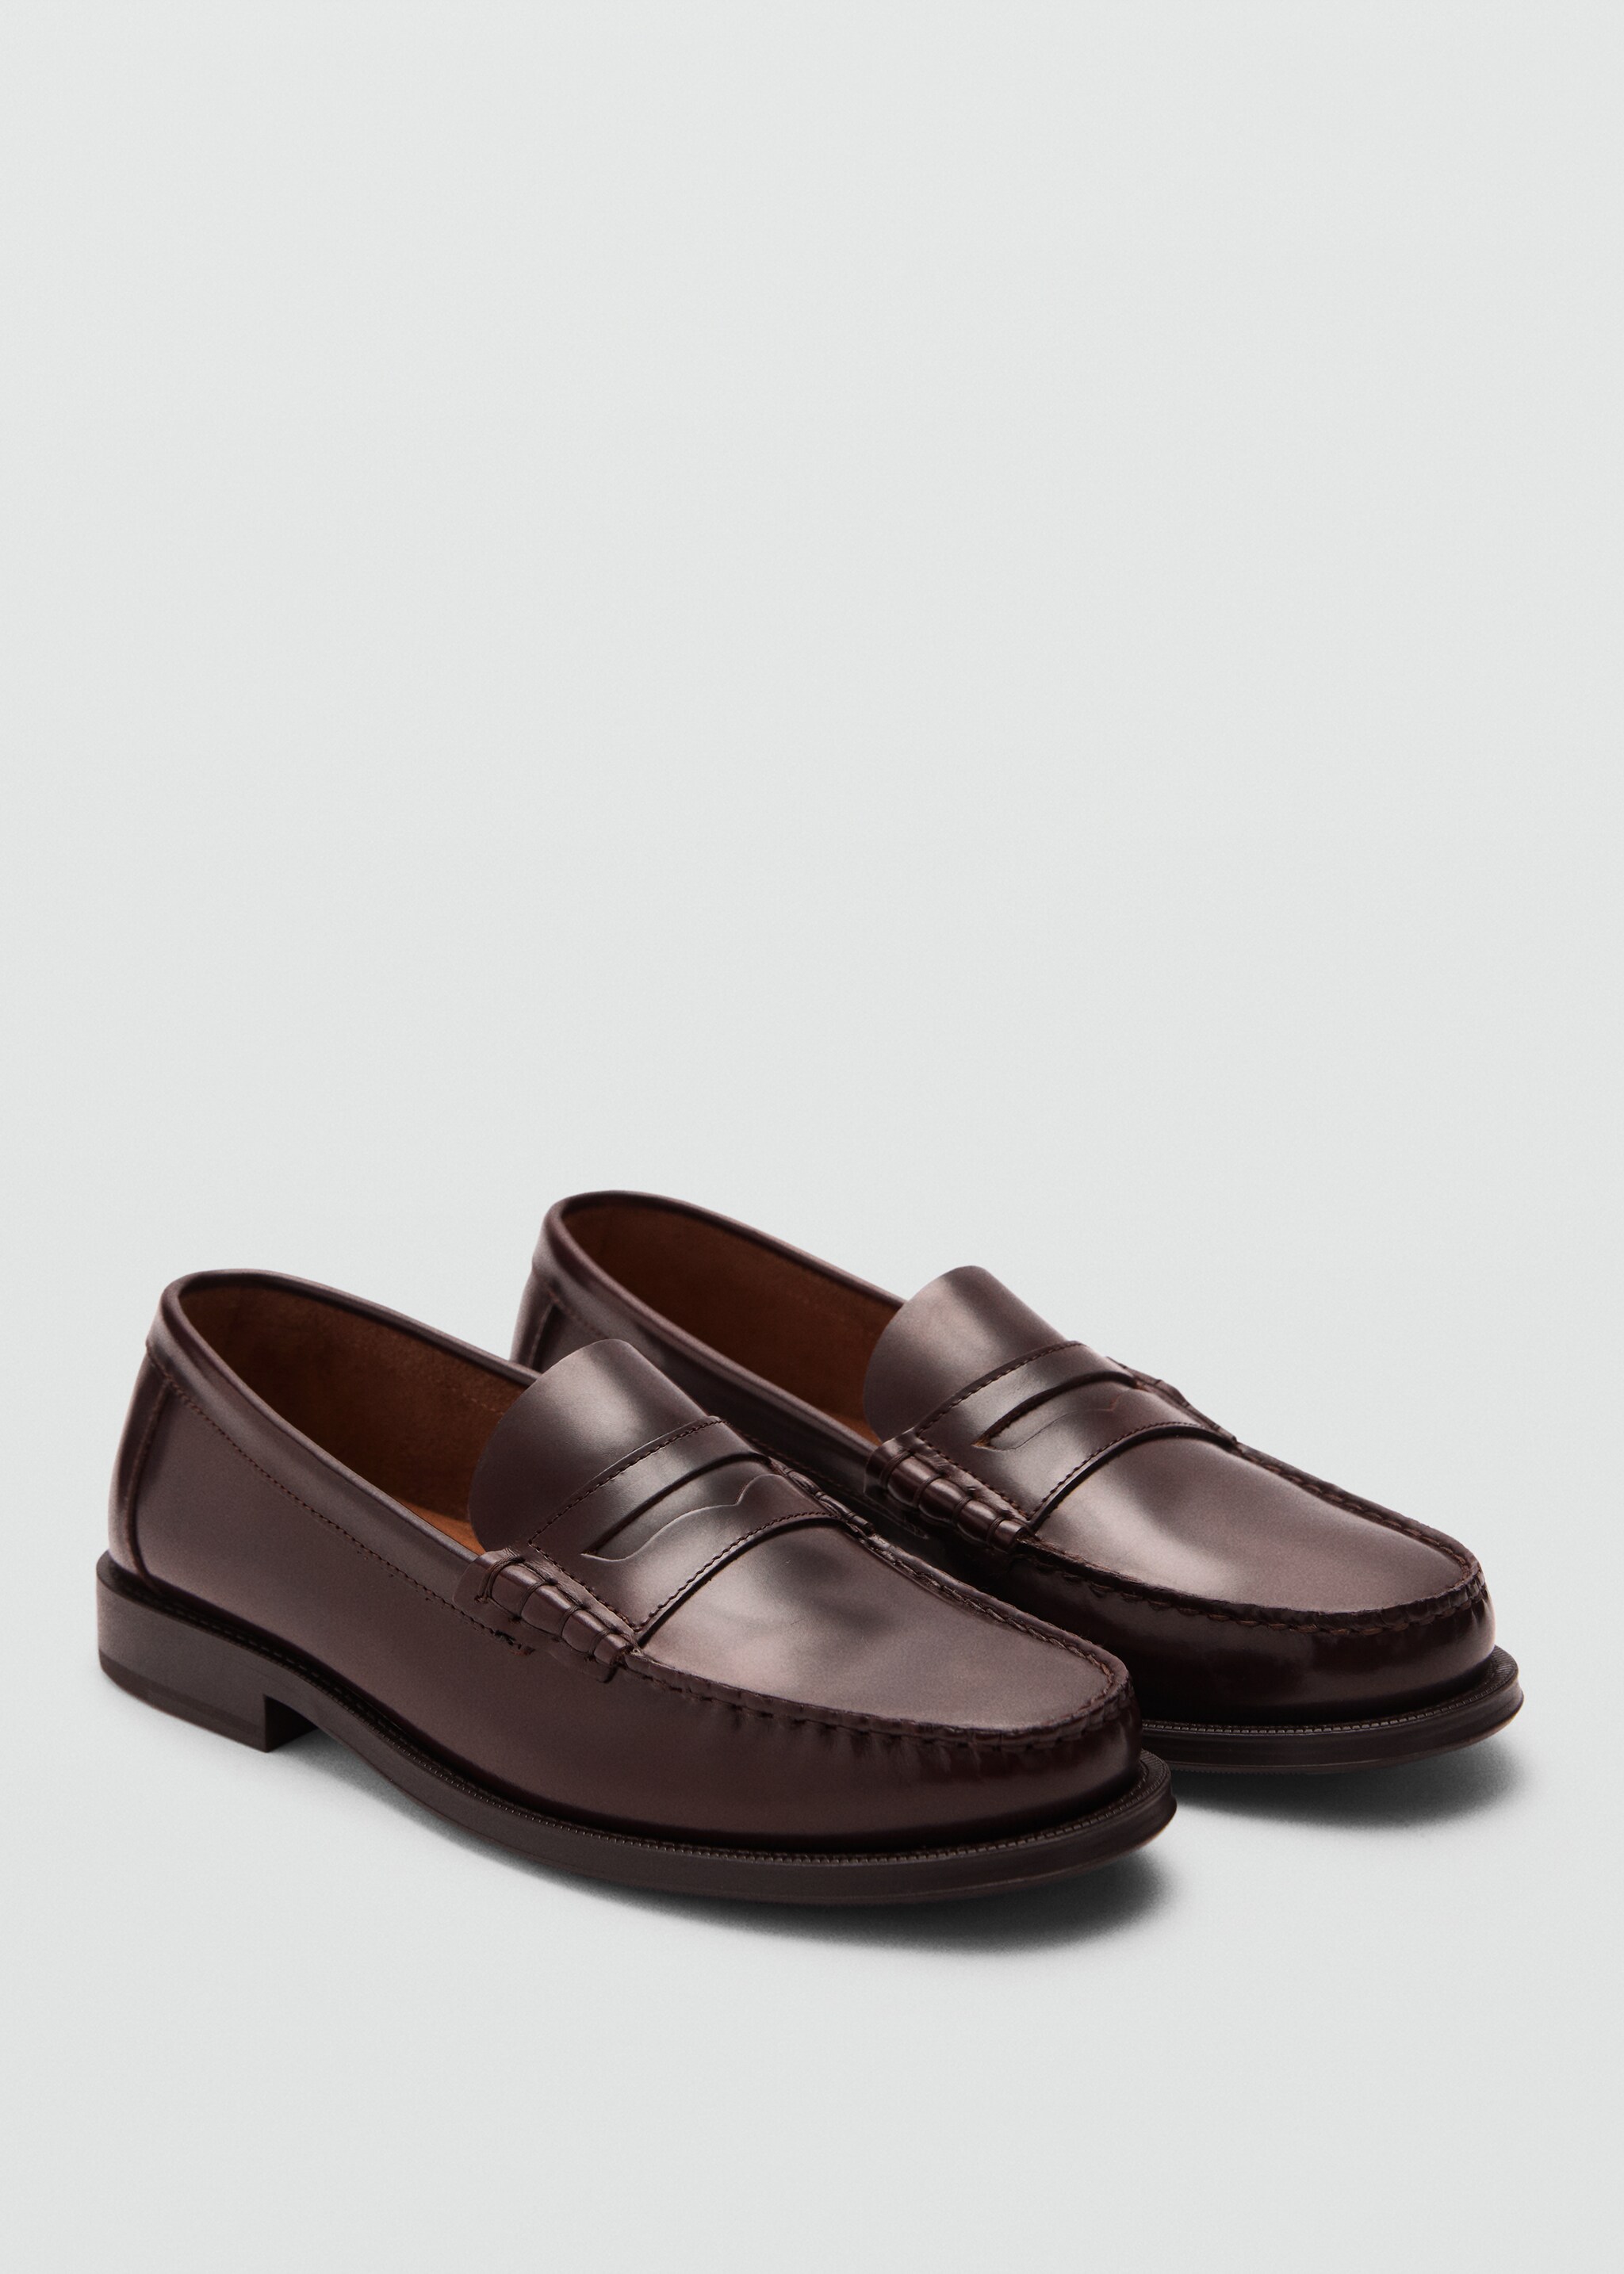 Aged-leather loafers - Medium plane